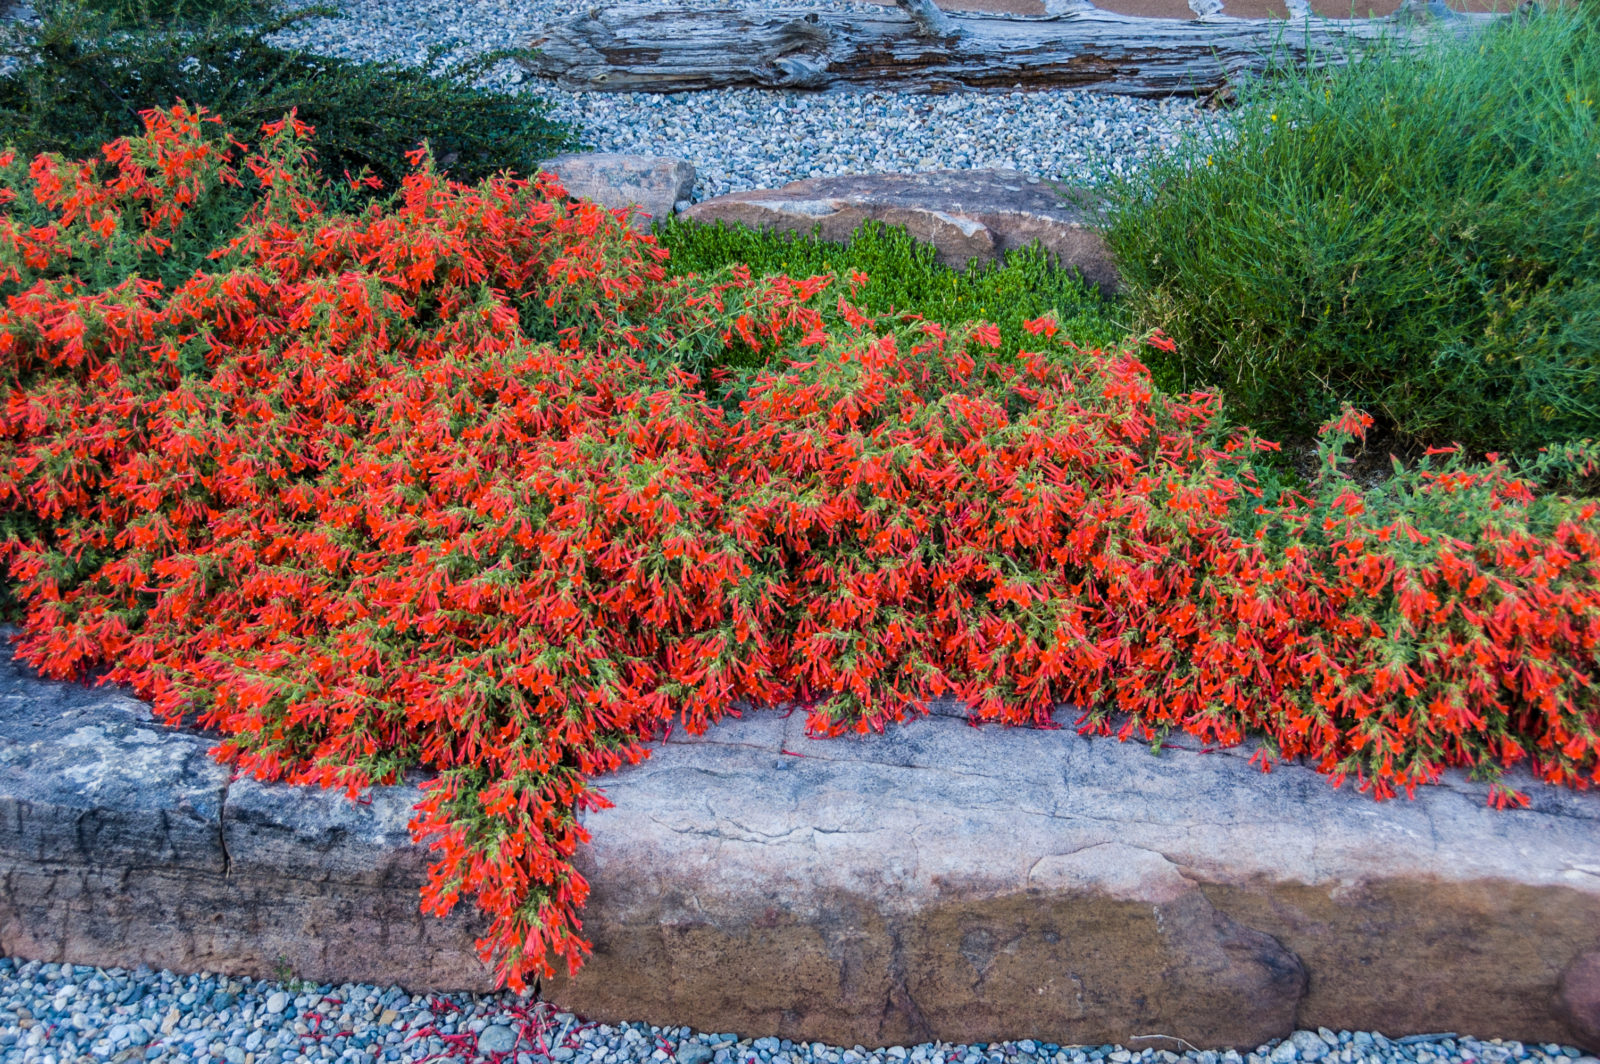 brillant red flowers scramble along the stone steps in this landscape design